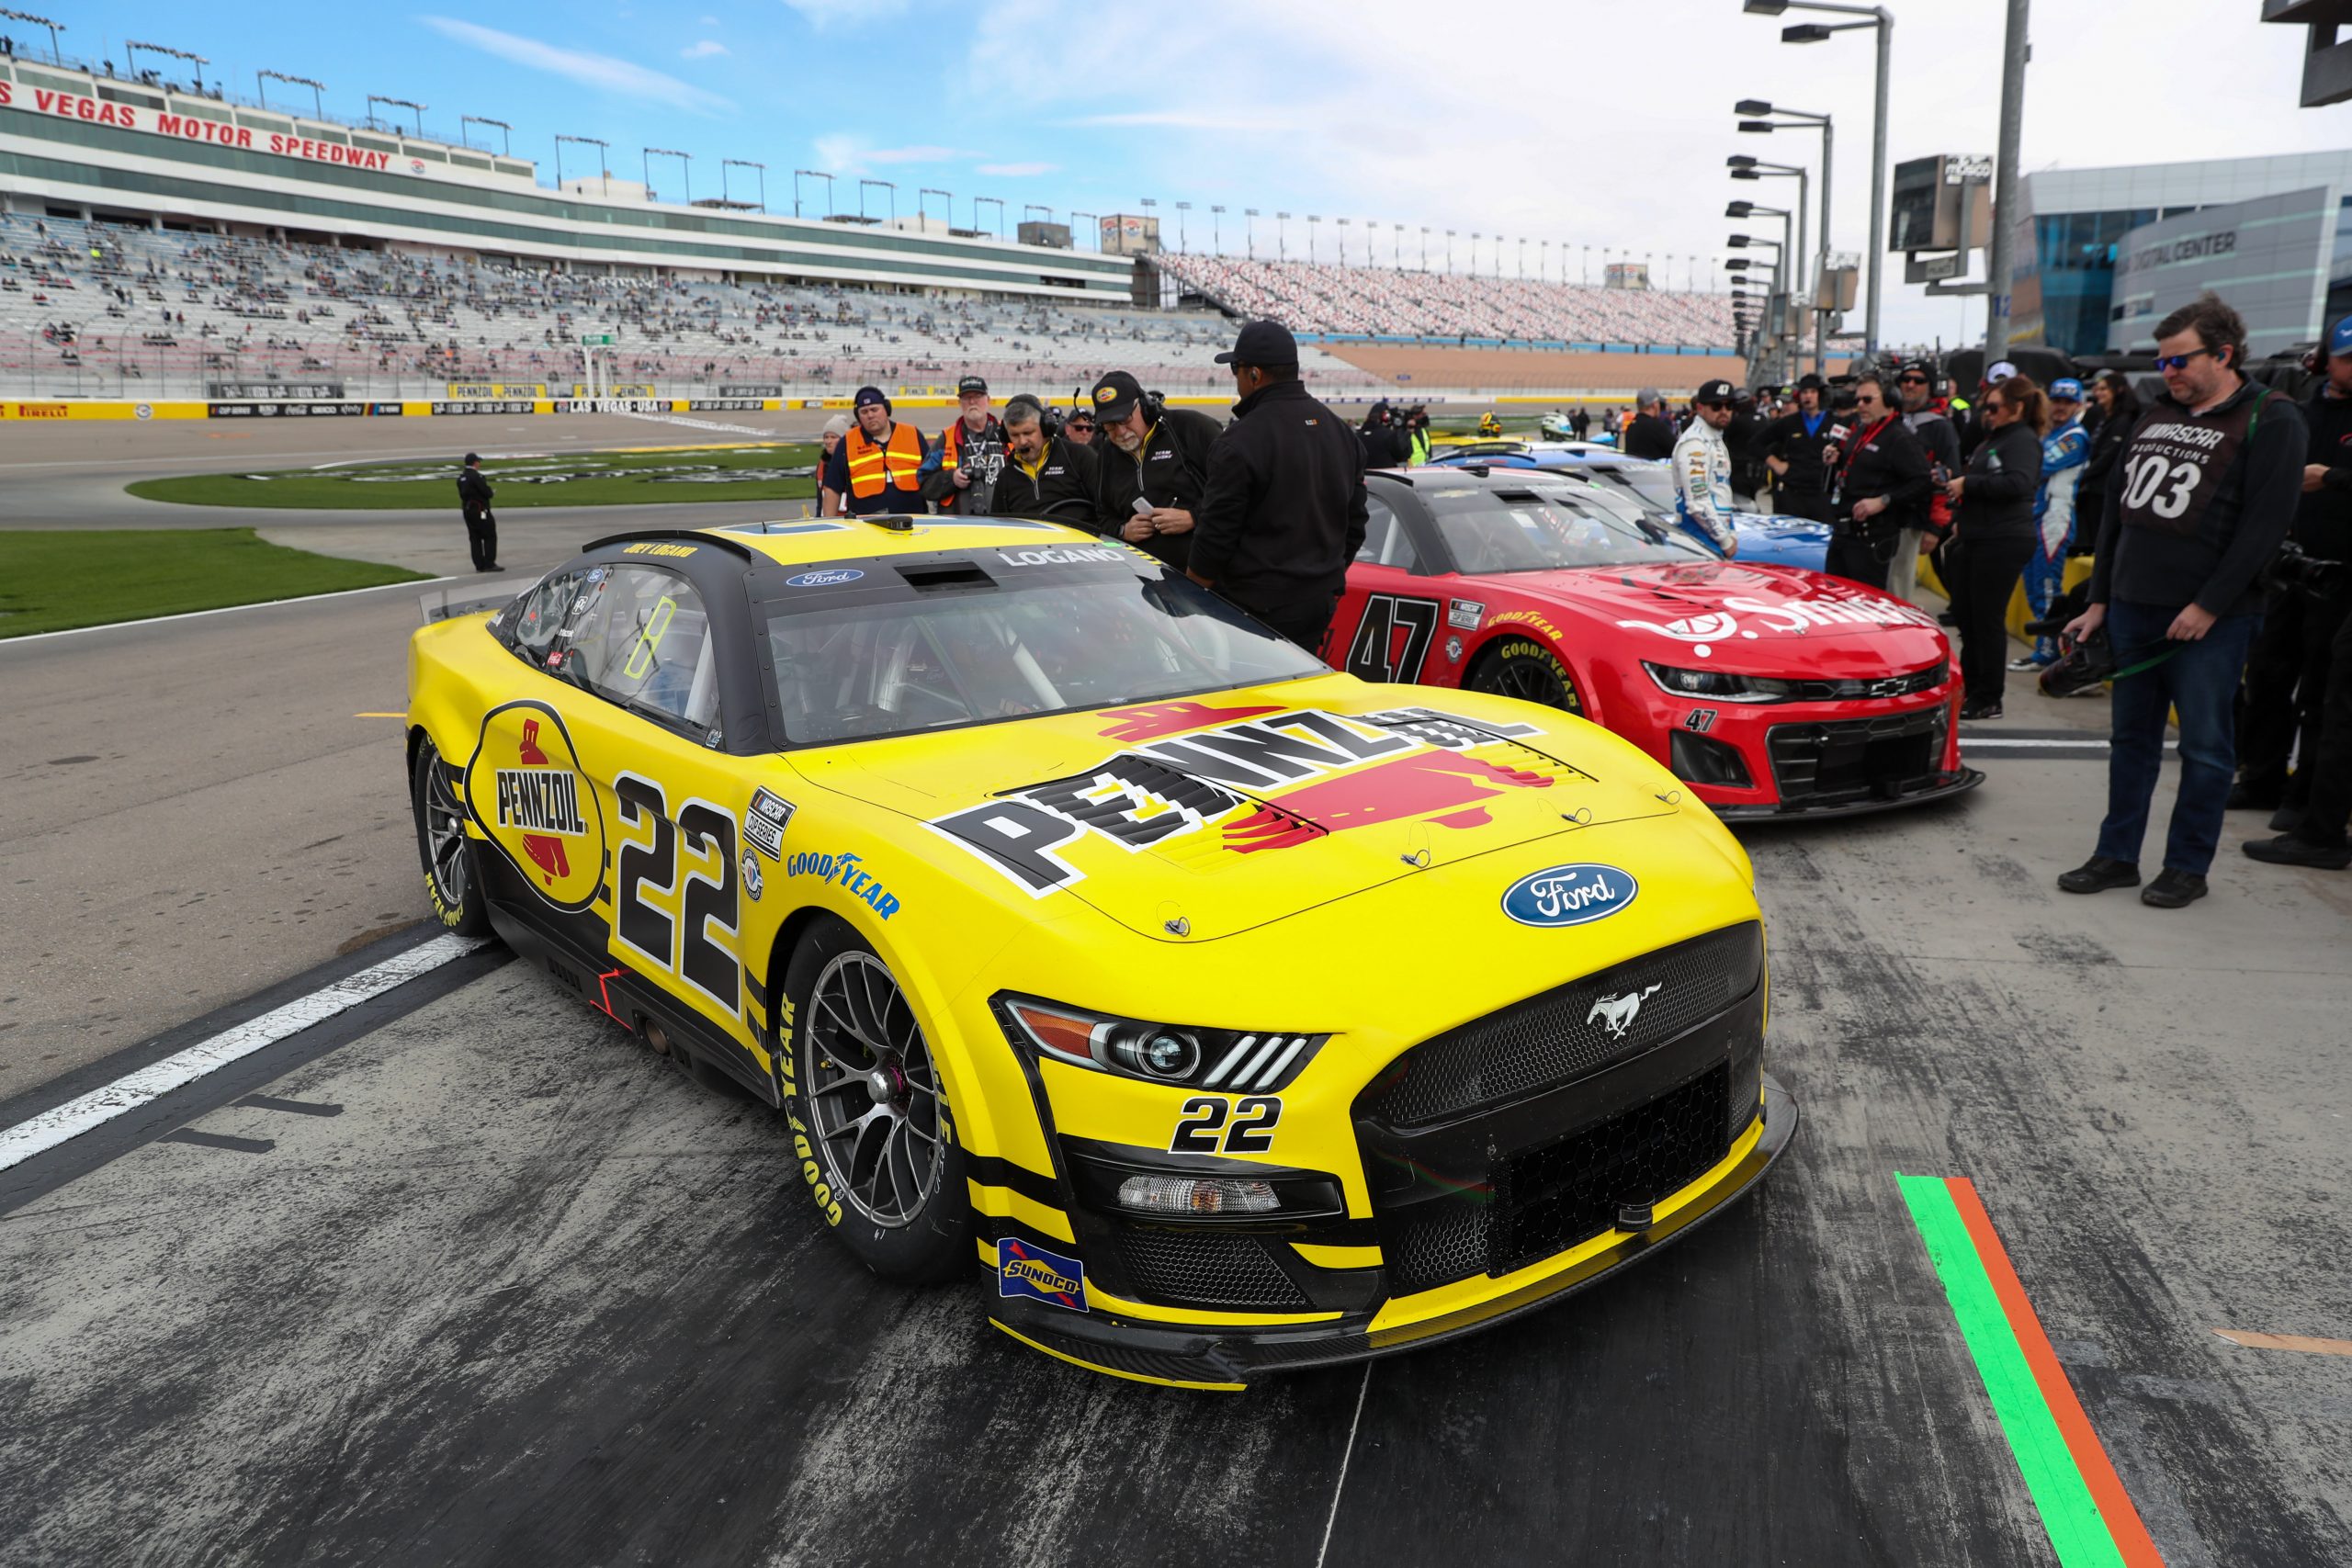 Joey Logano returns to Las Vegas much like he left it in the fall - ranked number one. (Photo: (Photo: Erik Smith | The Podium Finish)